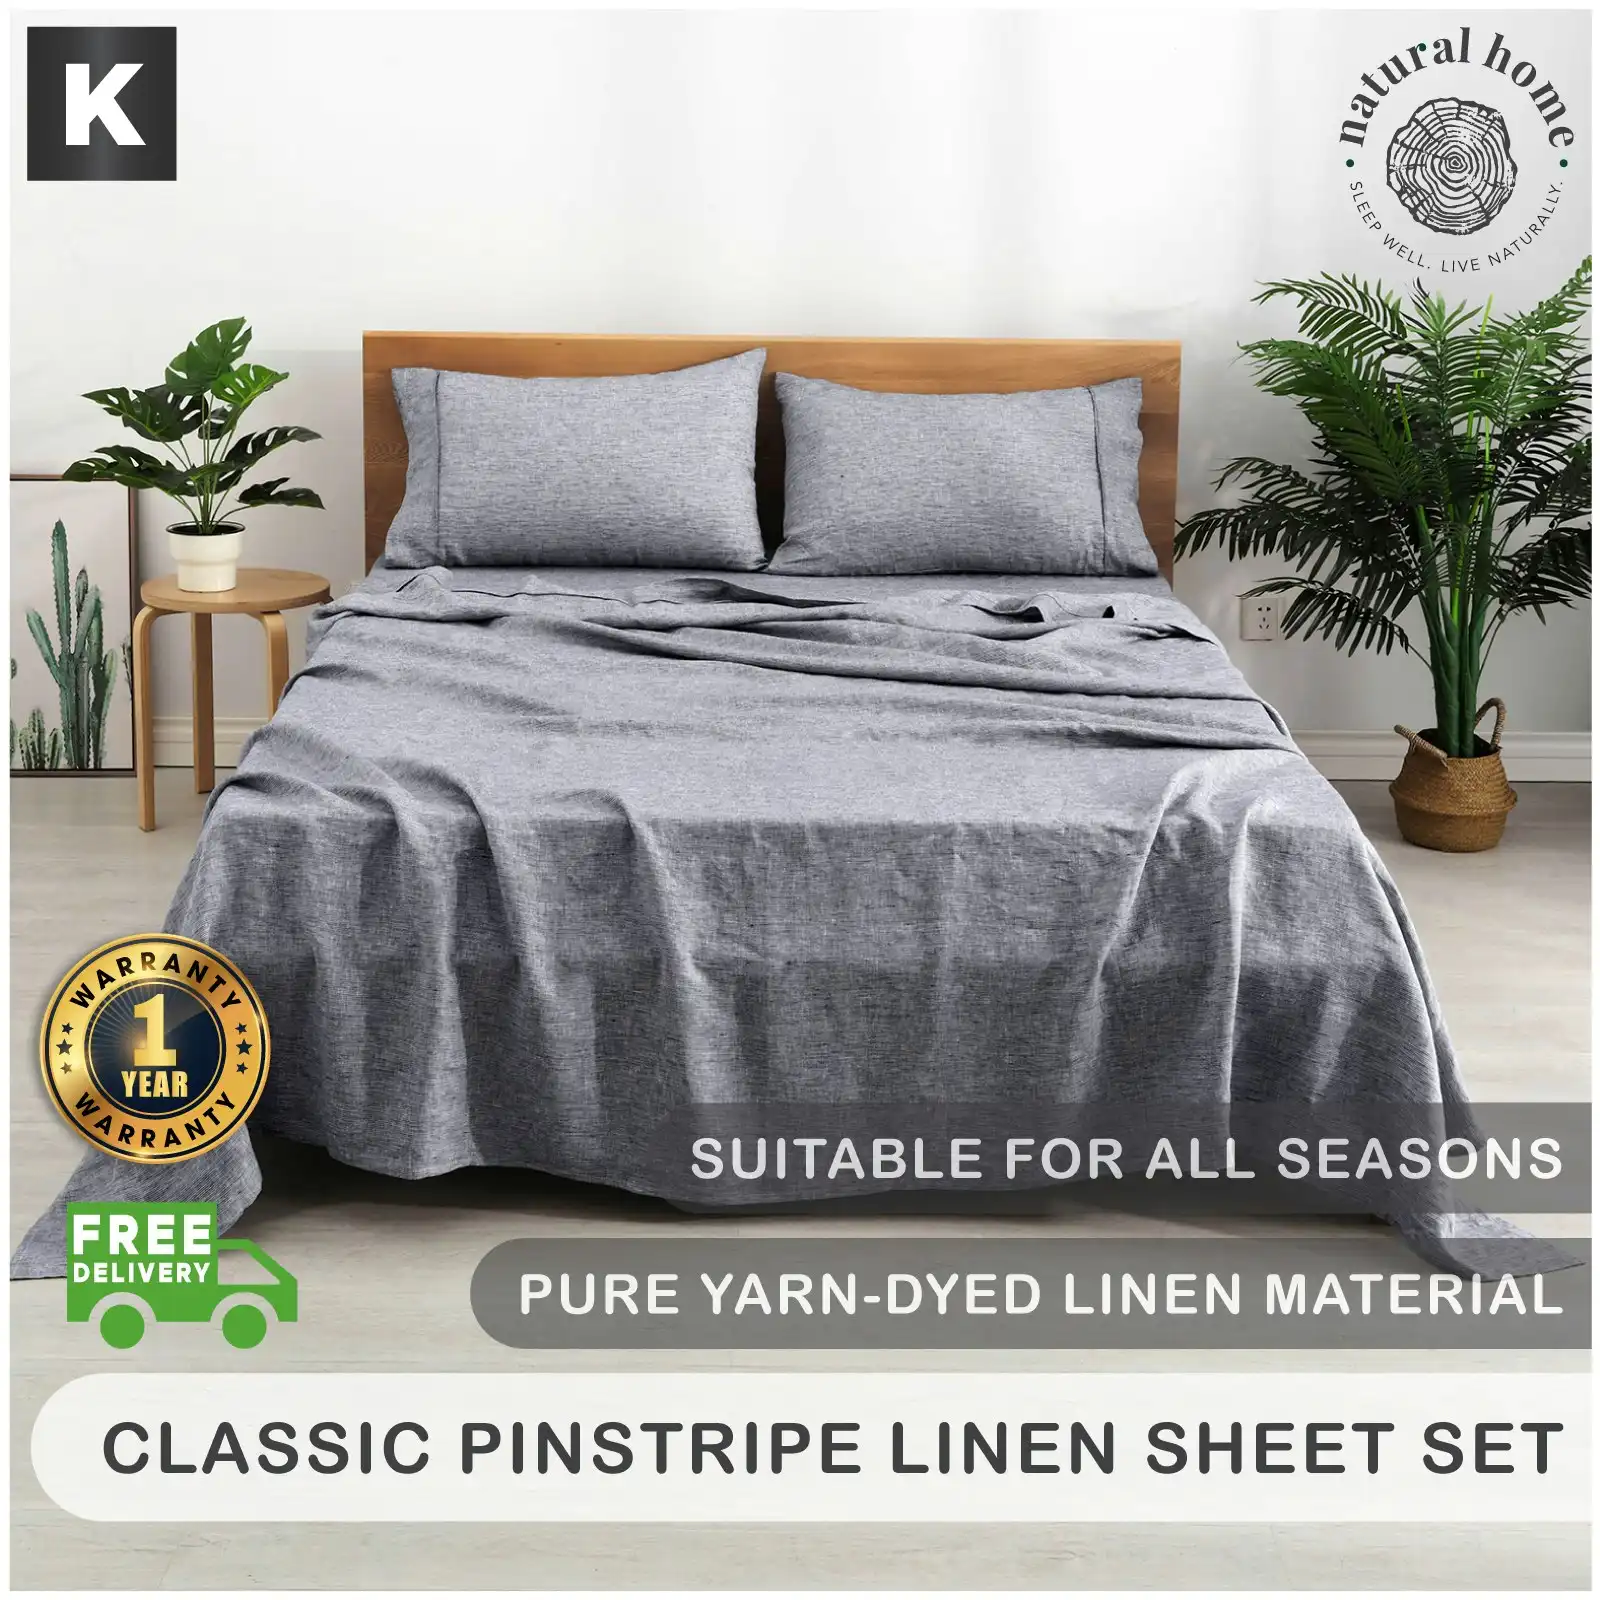 Natural Home Classic Pinstripe Linen Sheet Set Dark with White Pinstripe King Bed